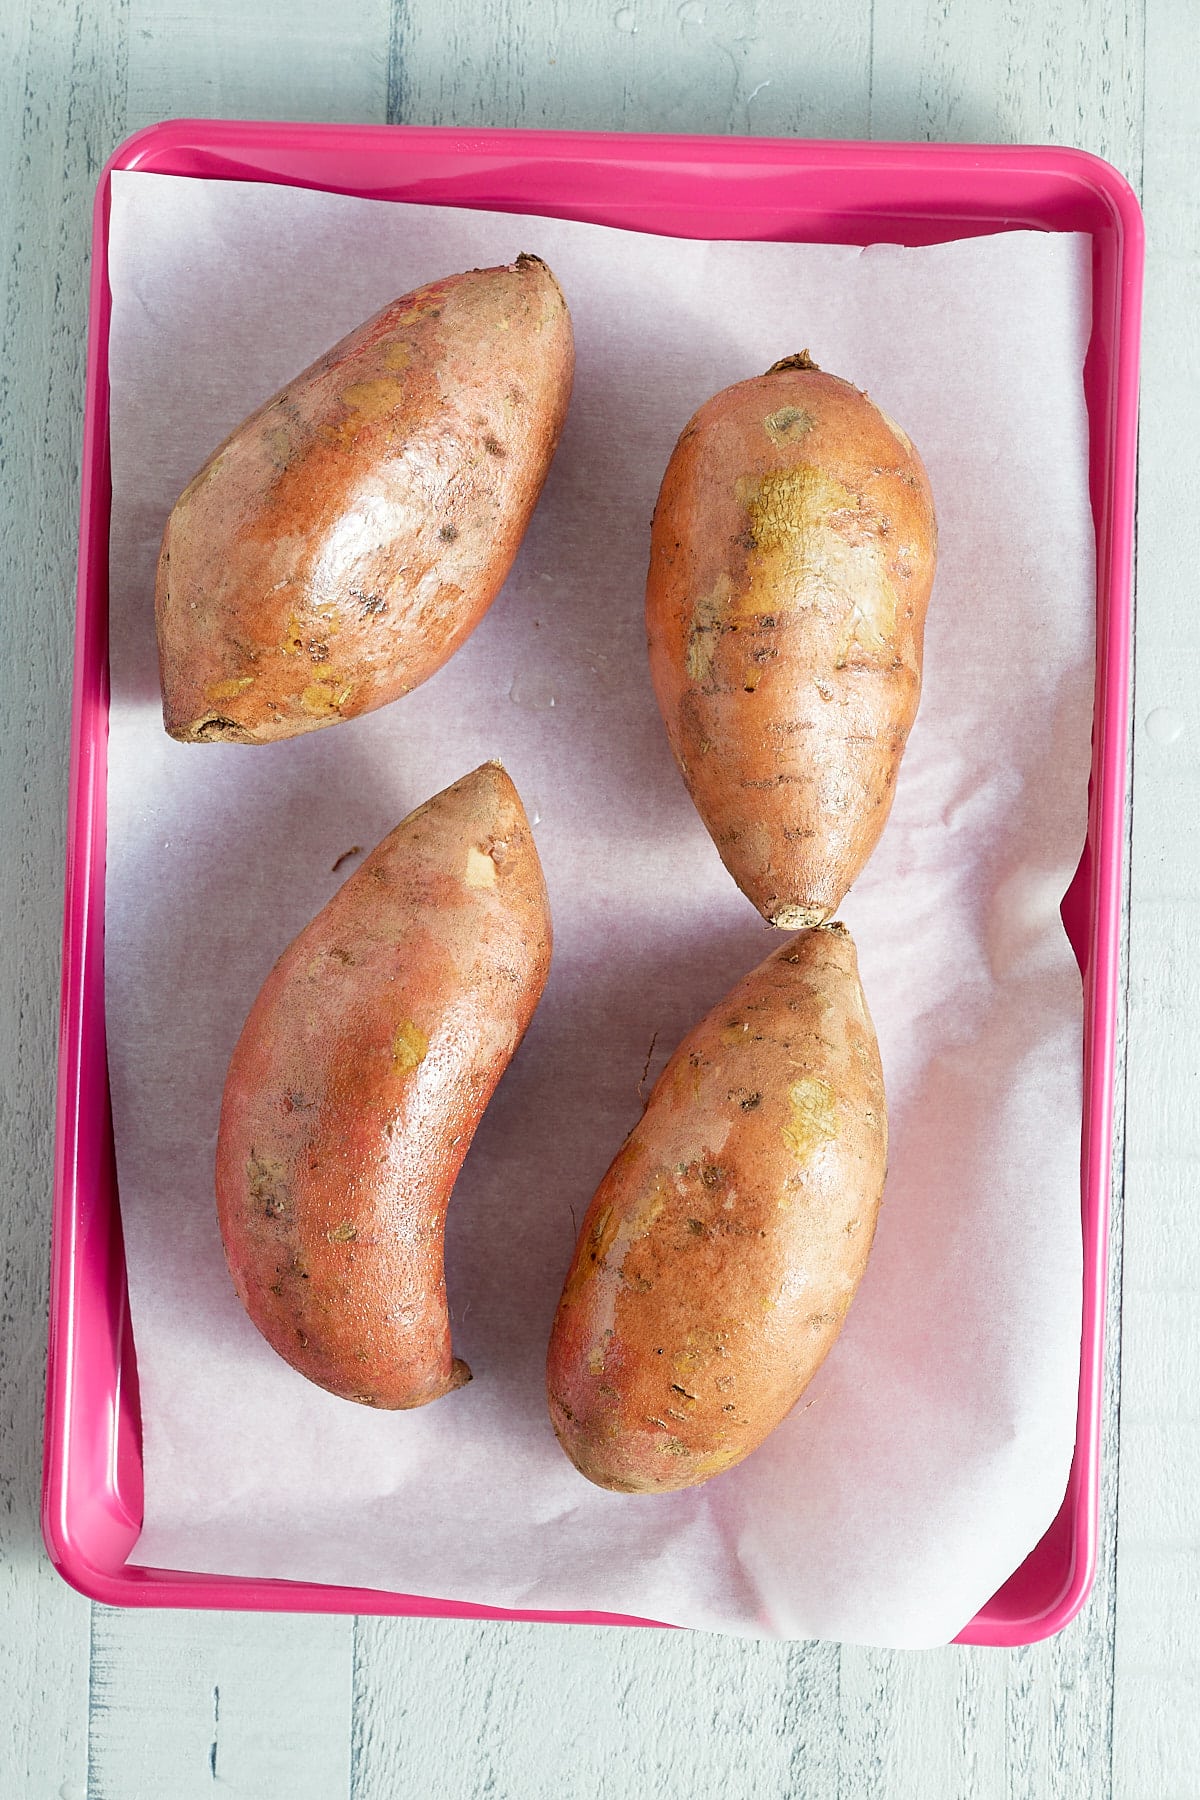 four sweet potatoes on a pink baking tray lined with parchment paper